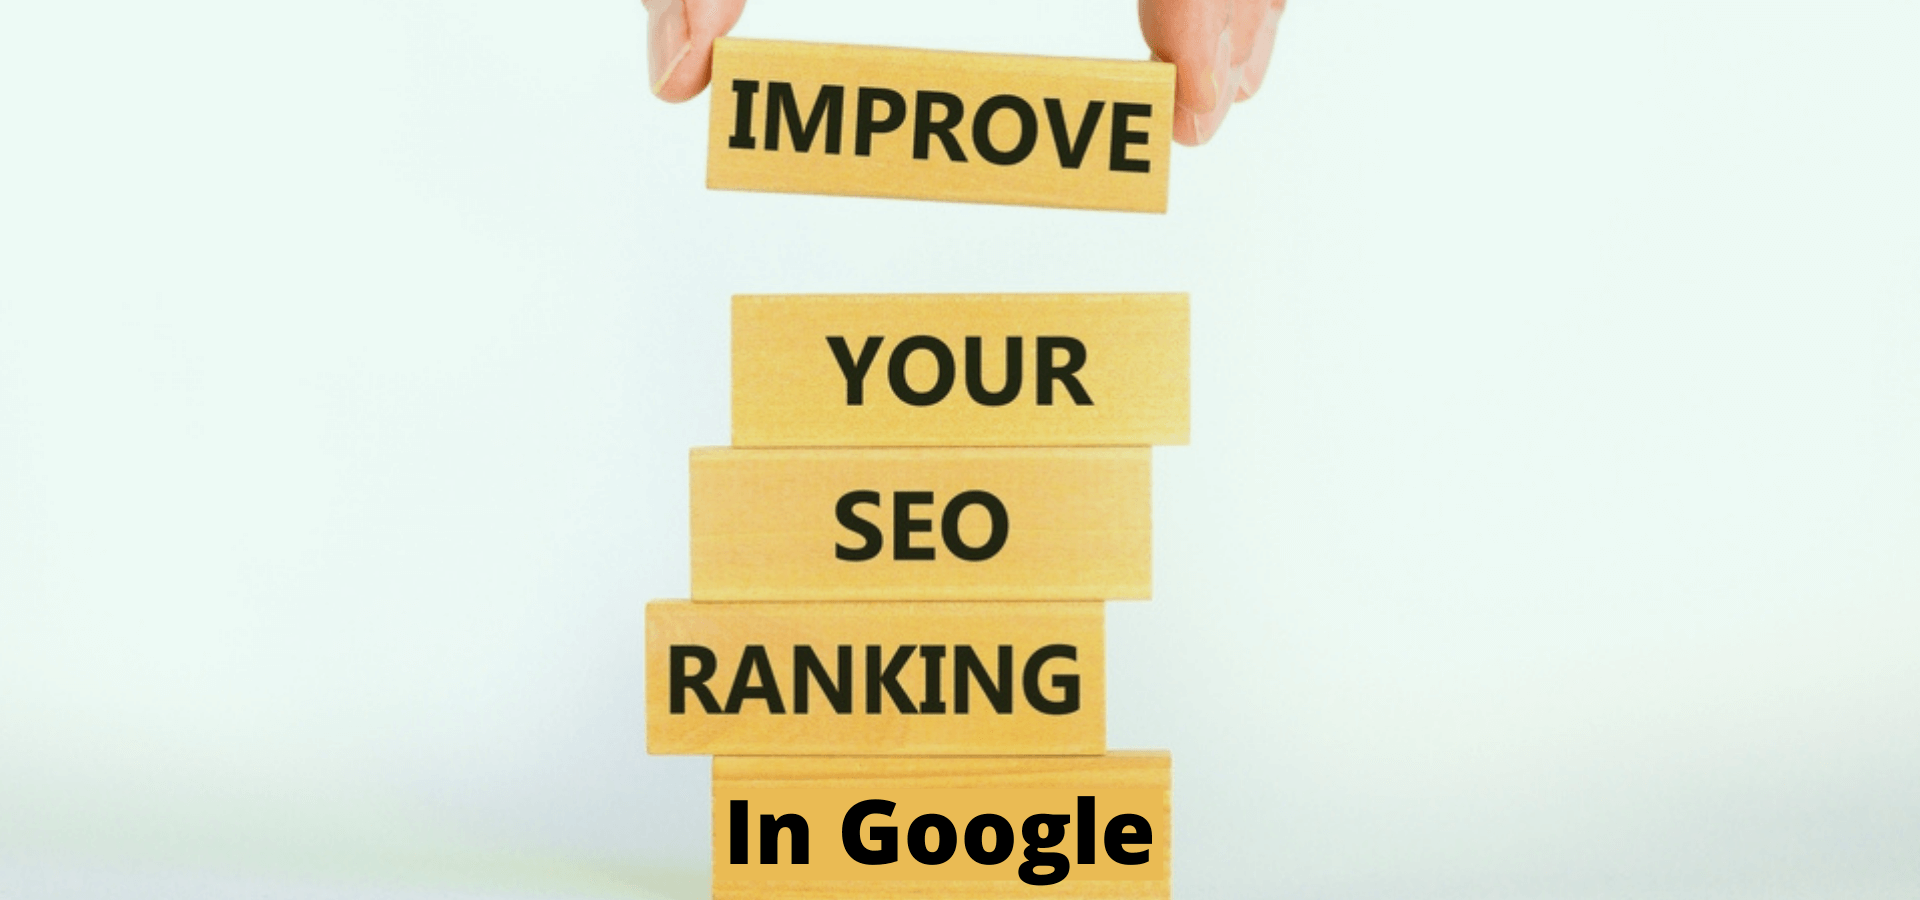 8 Free SEO Tools to Help You Improve Website Ranking in Google SERPs